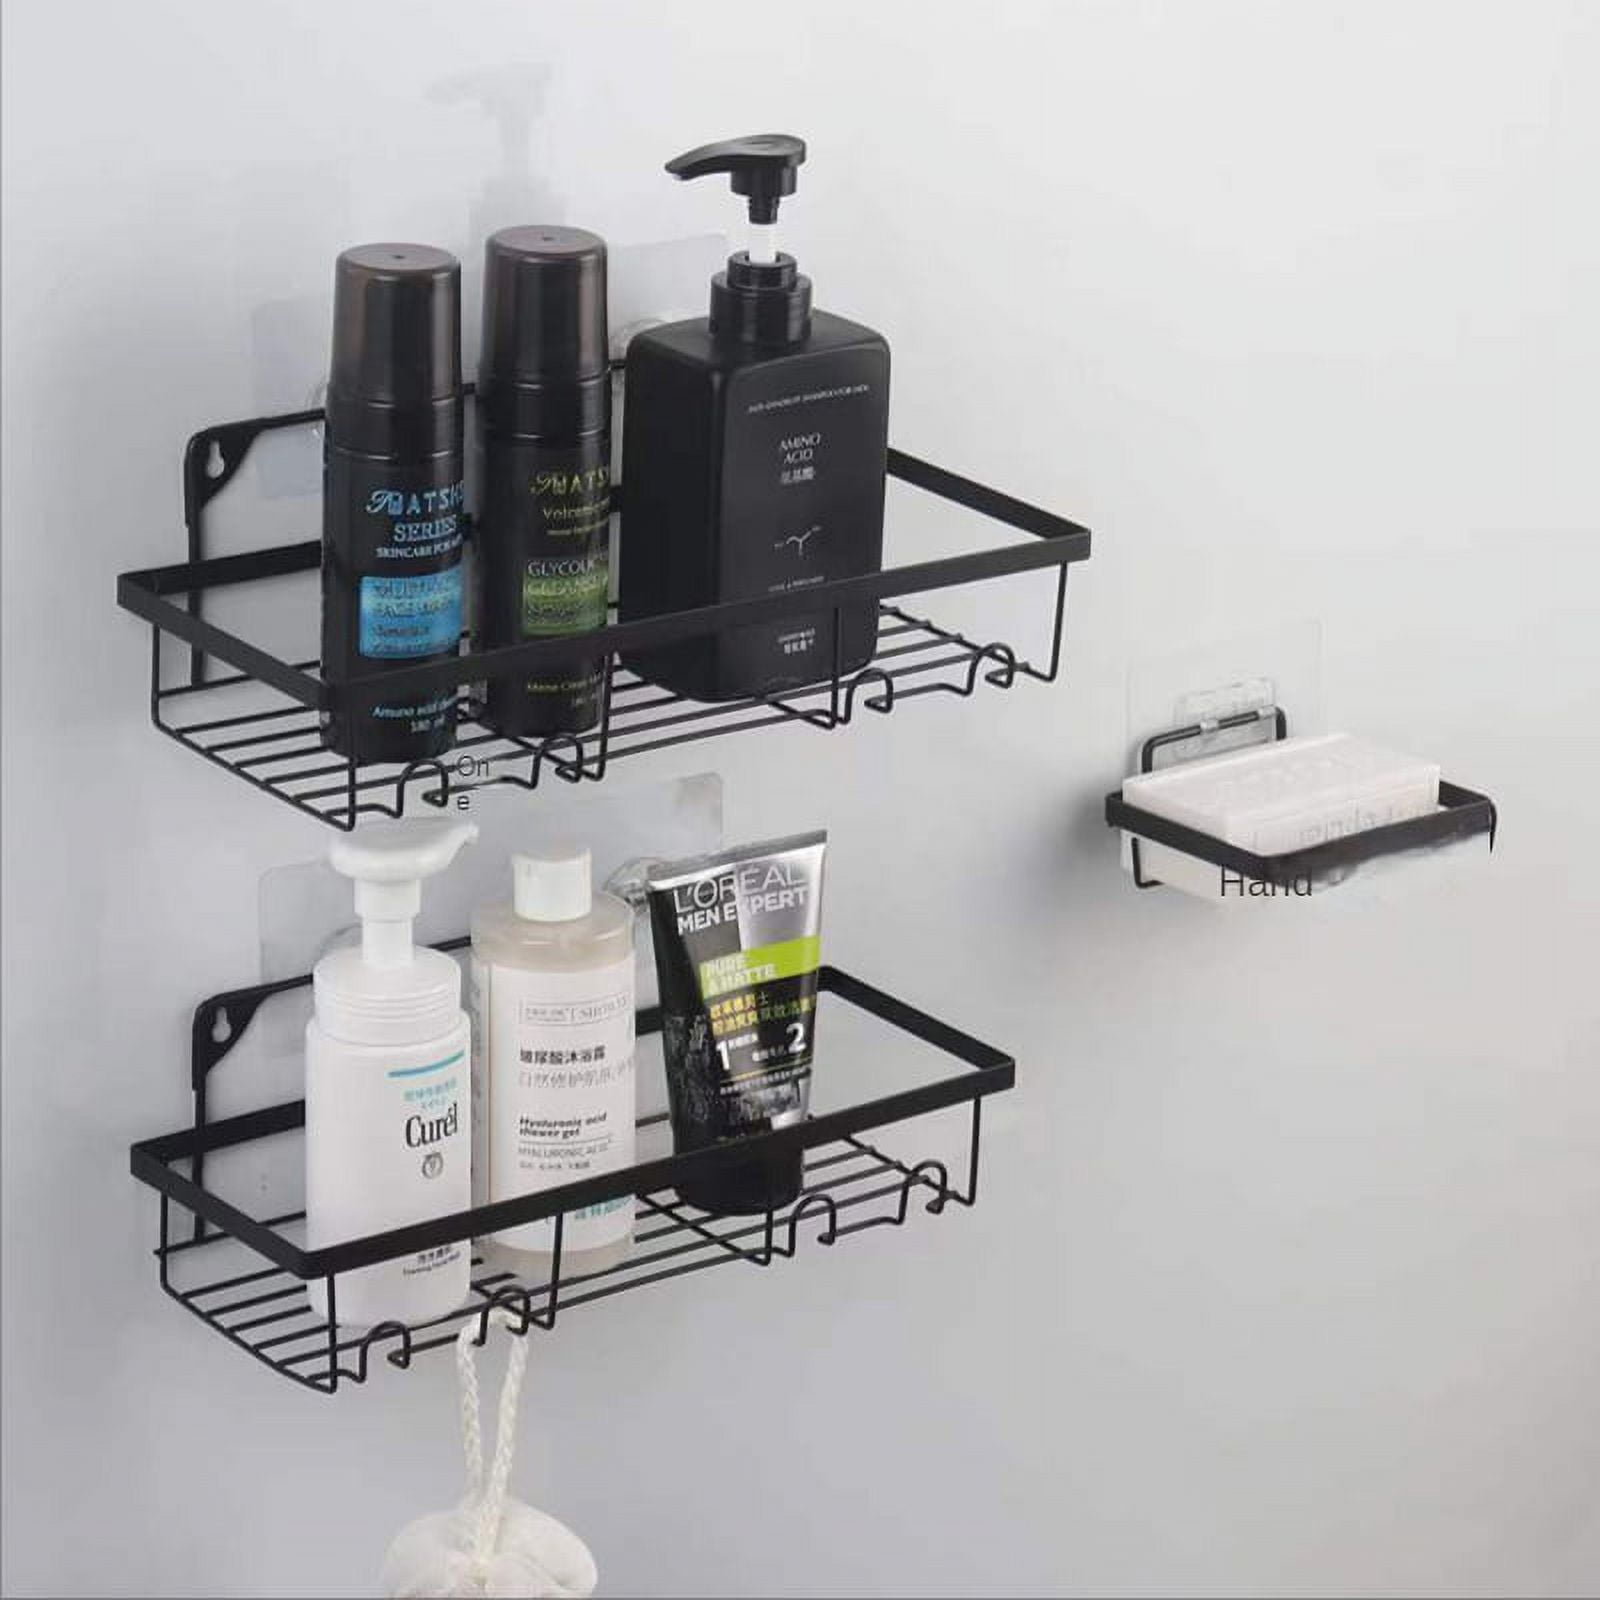 SWVZWY Acrylic Floating Shelves,Bathroom Shower Shelf,No Drill No Damage  Wall Mounted,Clear Invisible,Renter Friendly Shelves Can Be U